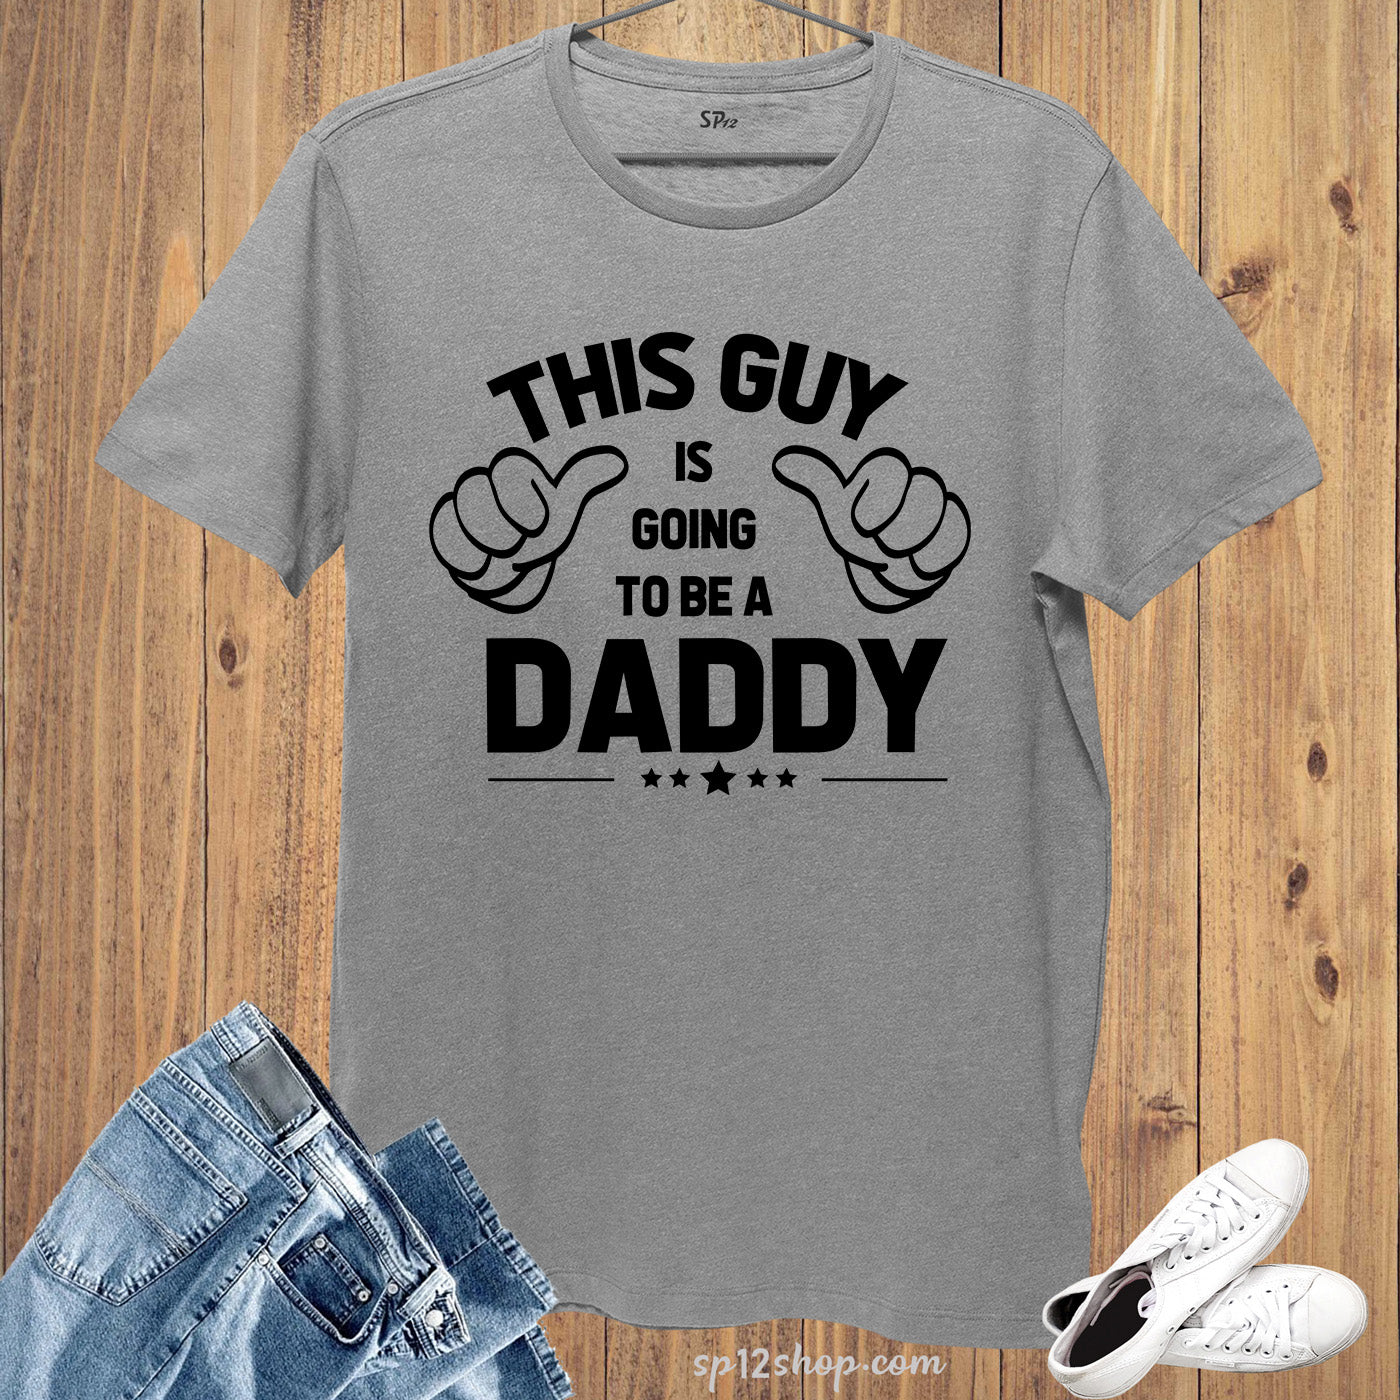 This Guy Is Going To Be a Daddy T Shirt